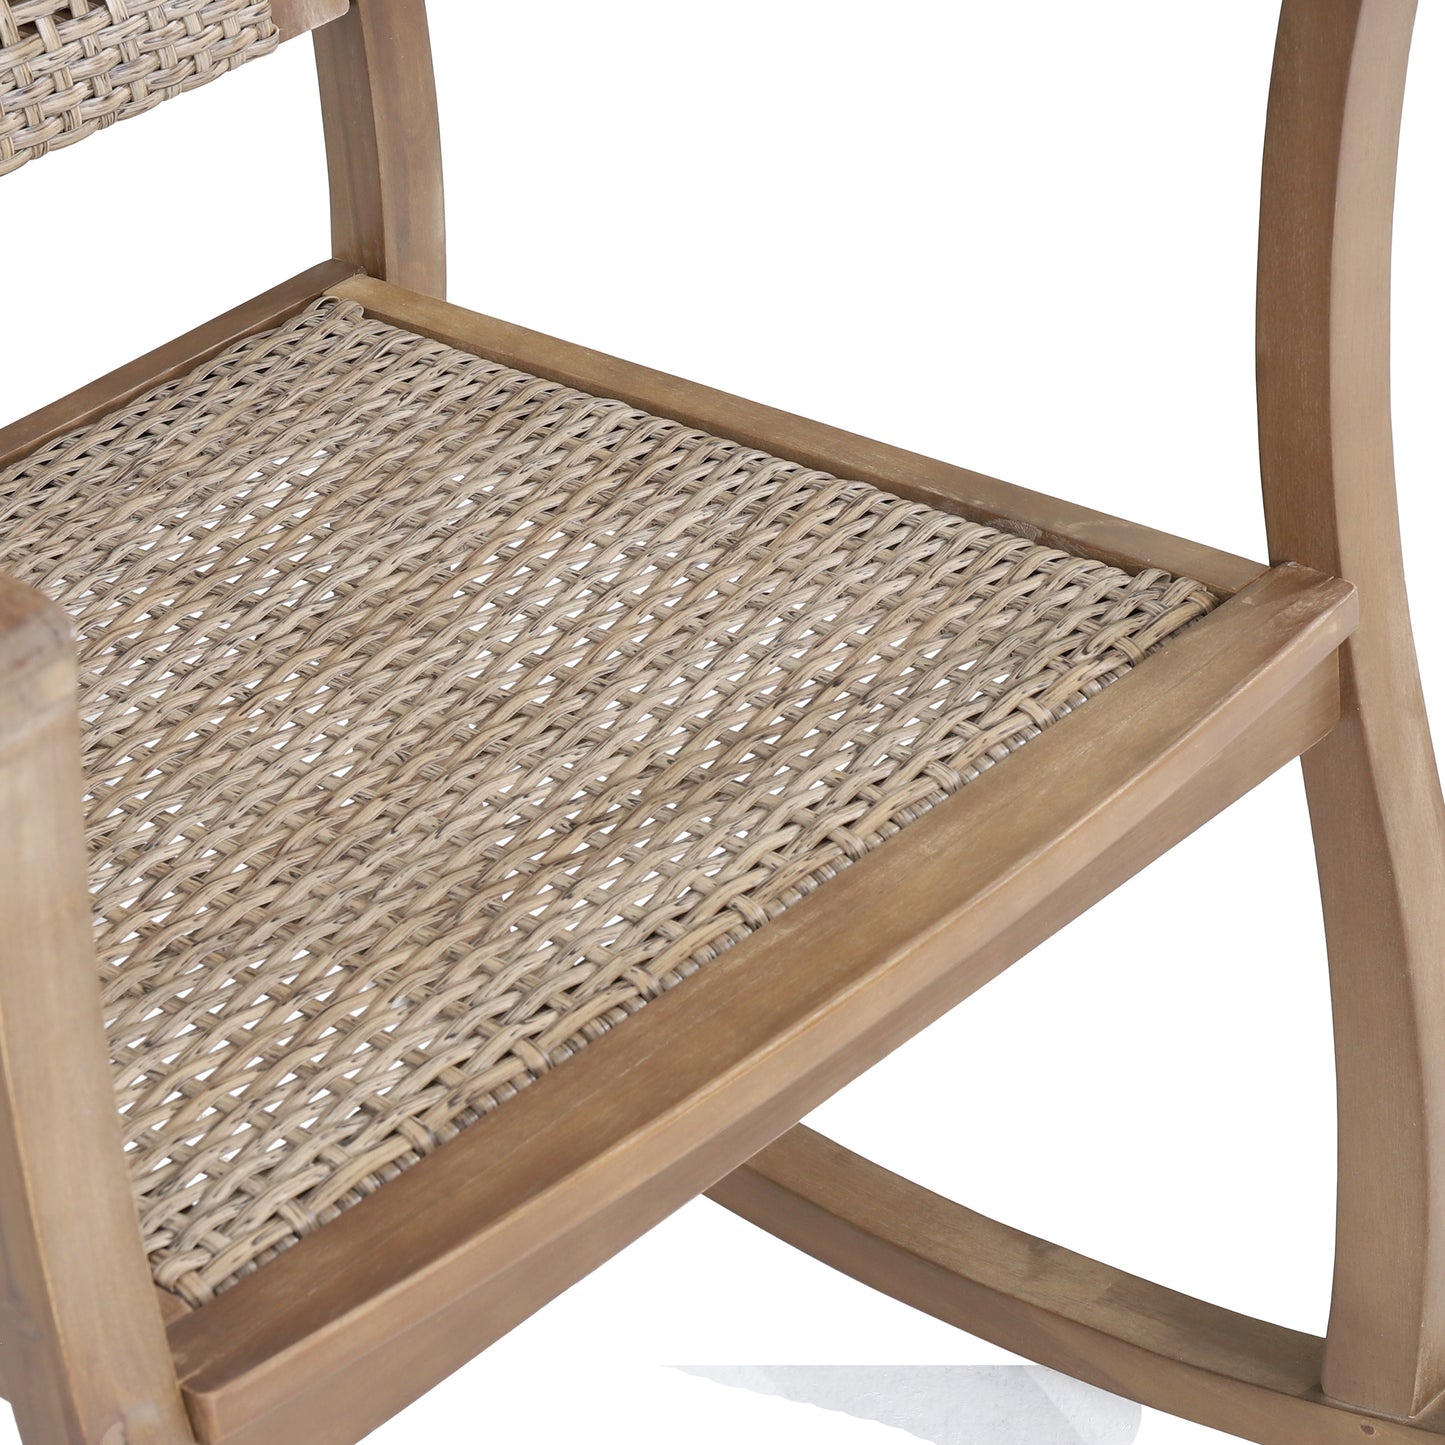 Uintah Outdoor Acacia Wood and Wicker Rocking Chair, Light Brown